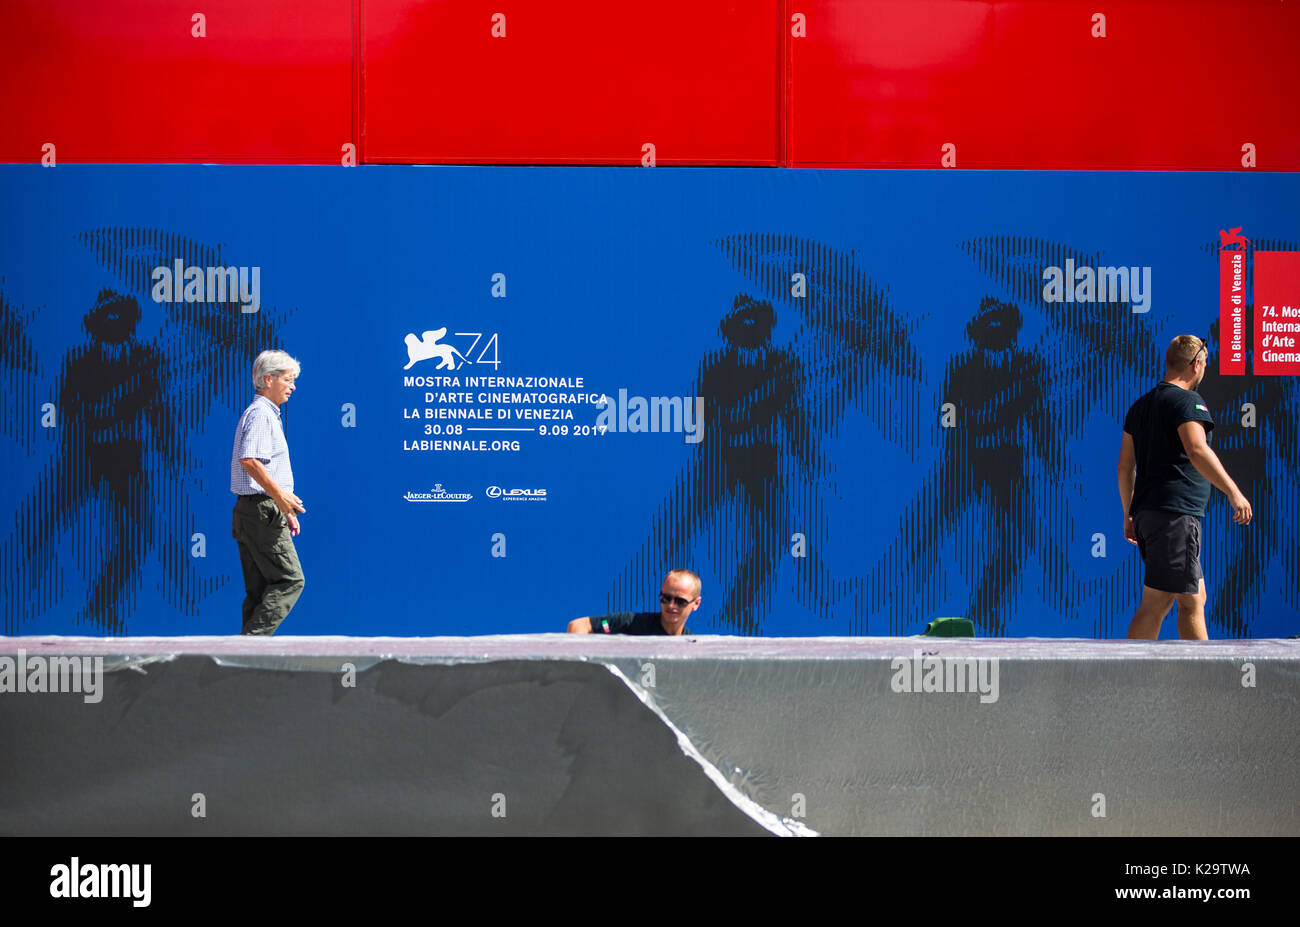 Venice, Italy. 29th Aug, 2017. Workers walk past the official poster of the 74th Venice International Film Festival, in Venice, Italy, on Aug. 29, 2017. The 74th Venice Film Festival will kick off in Lido of Venice on Aug. 30 and run until Sept. 9. Credit: Jin Yu/Xinhua/Alamy Live News Stock Photo